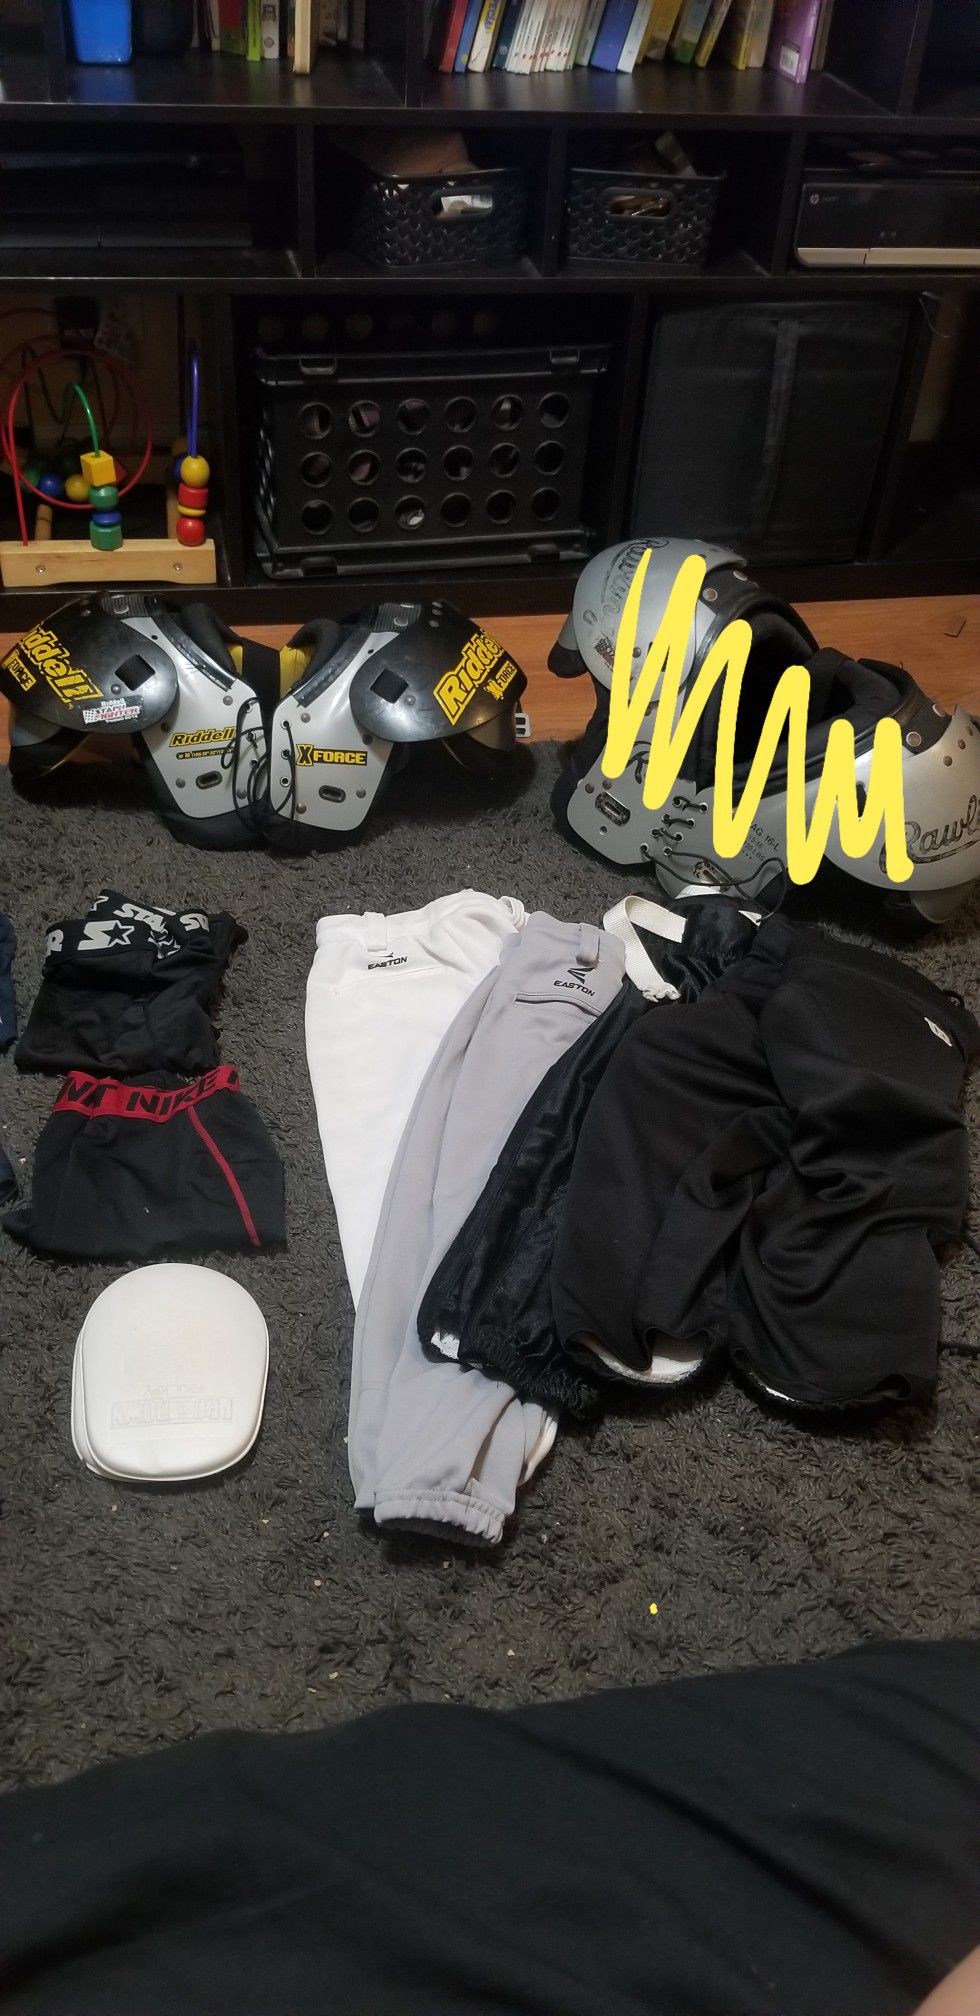 Kids youth football gear for Sale in Houston, TX - OfferUp